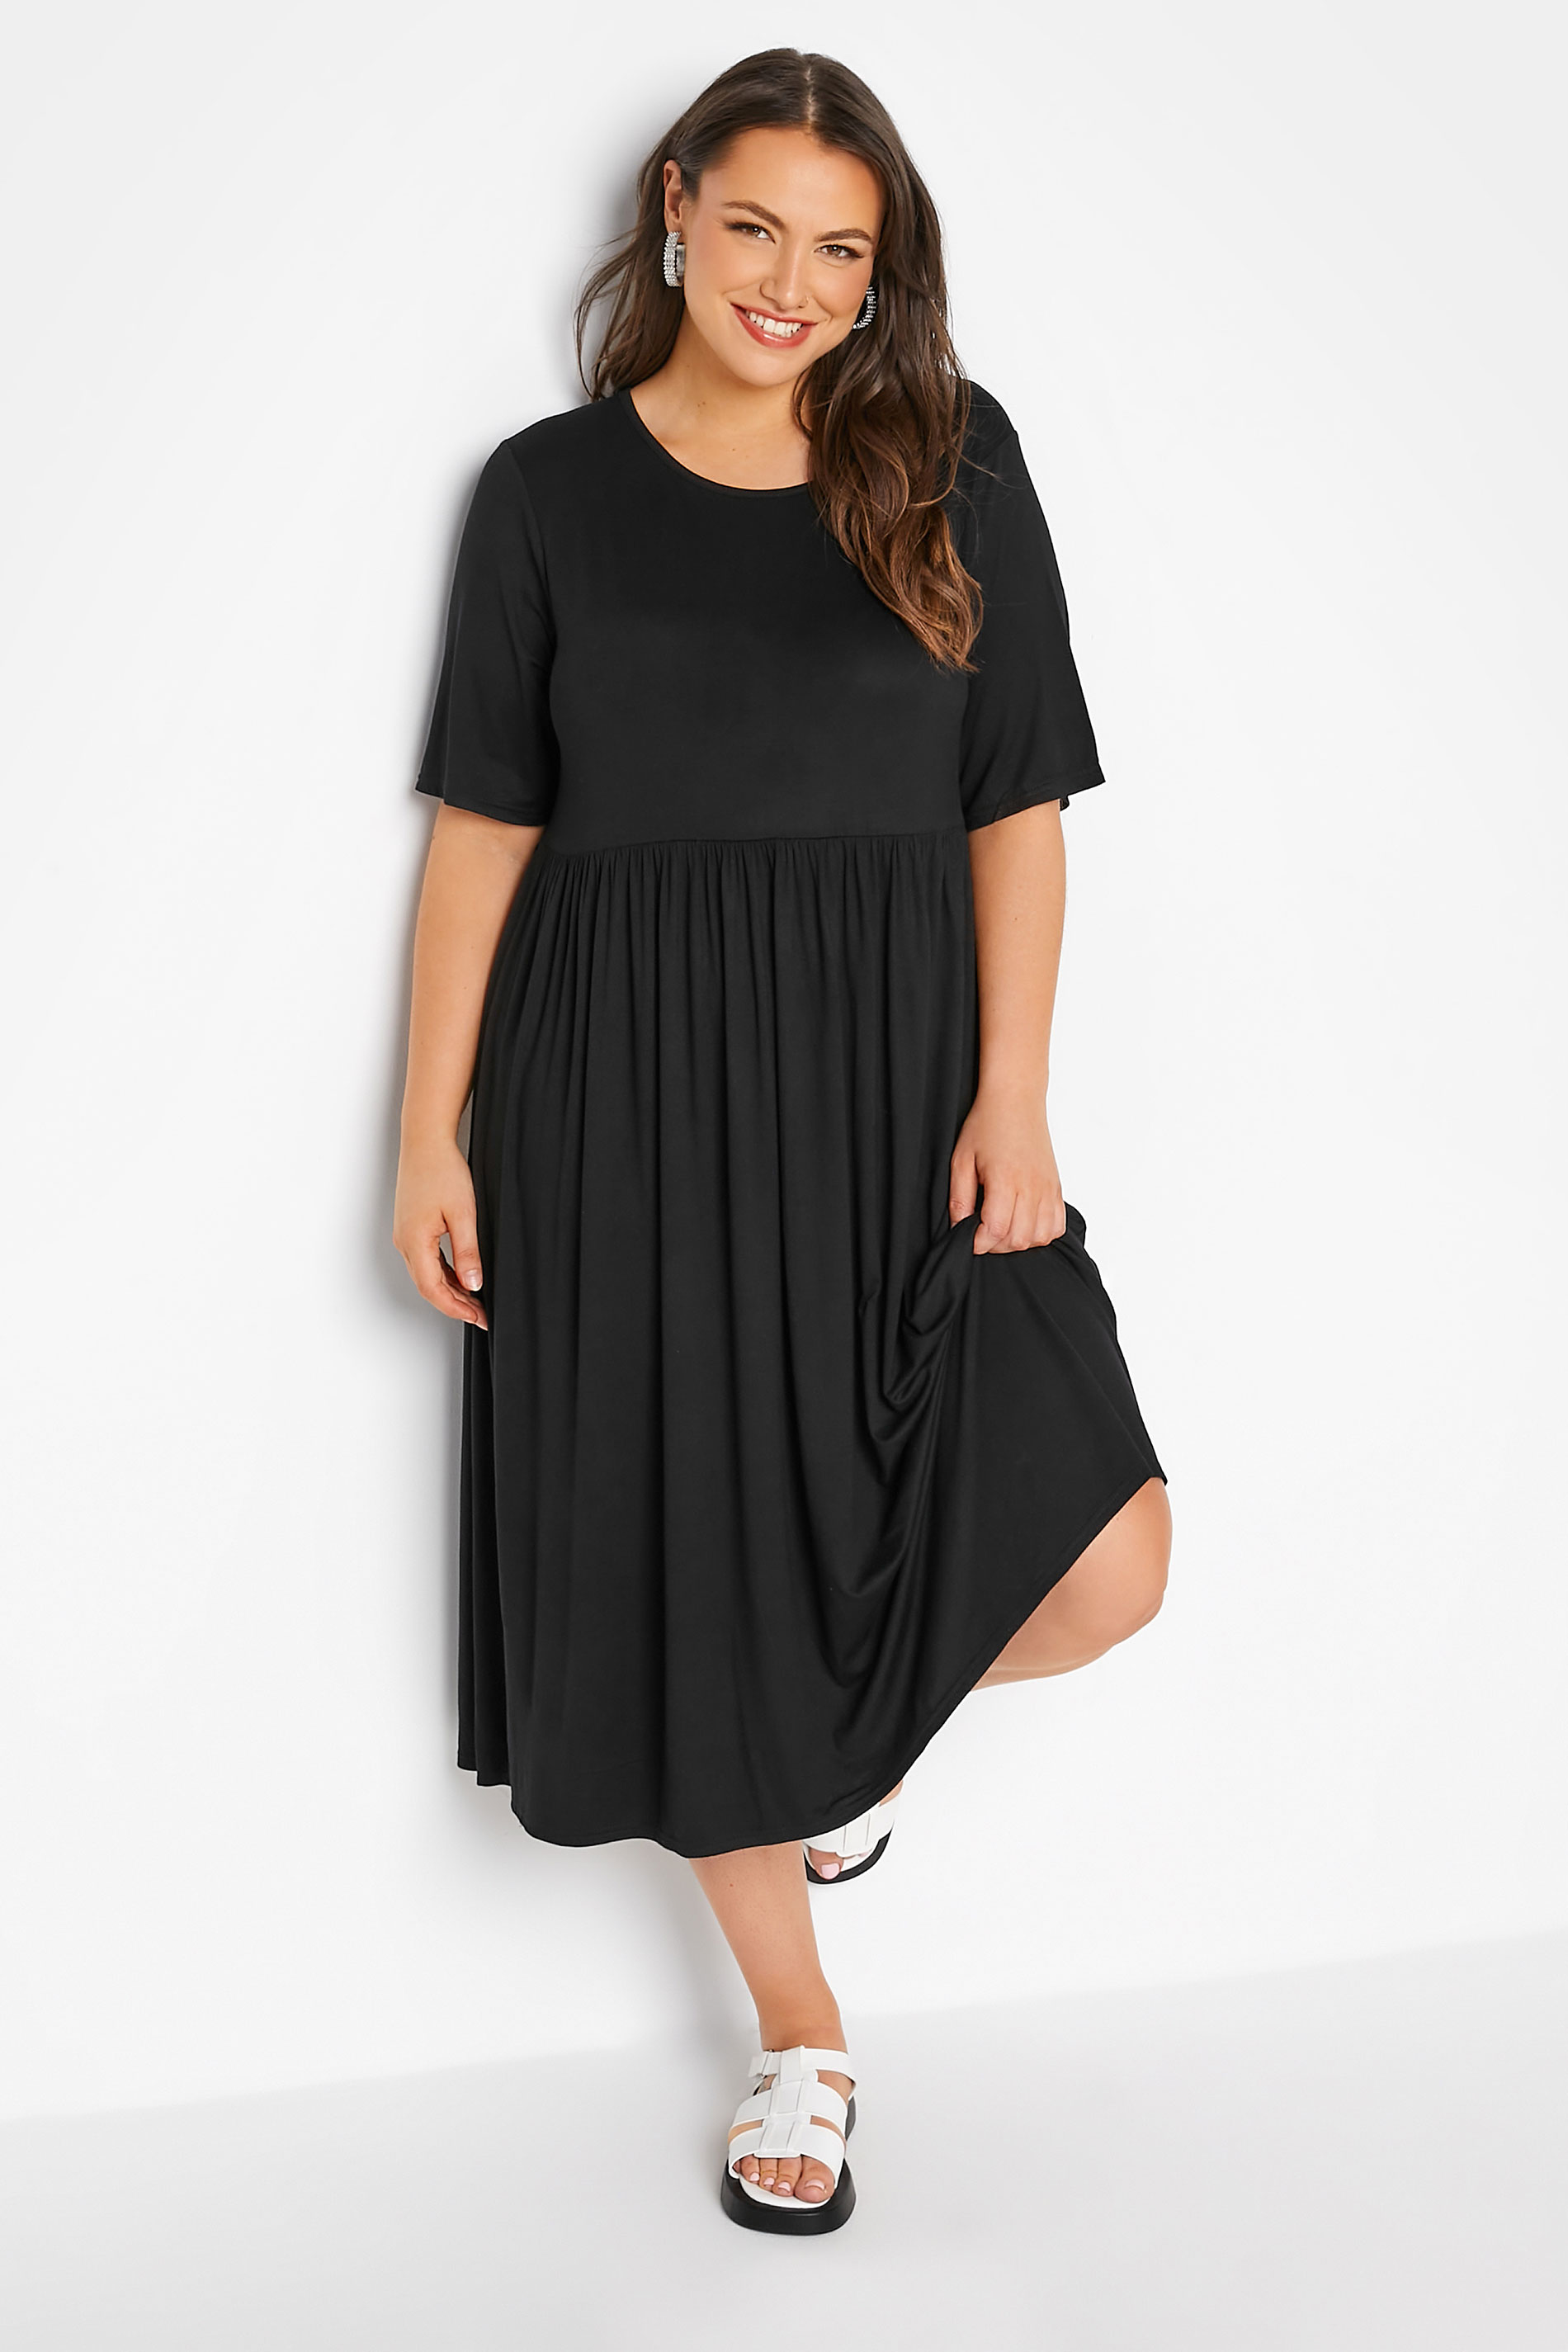 LIMITED COLLECTION Curve Black Midaxi Smock Dress_A.jpg